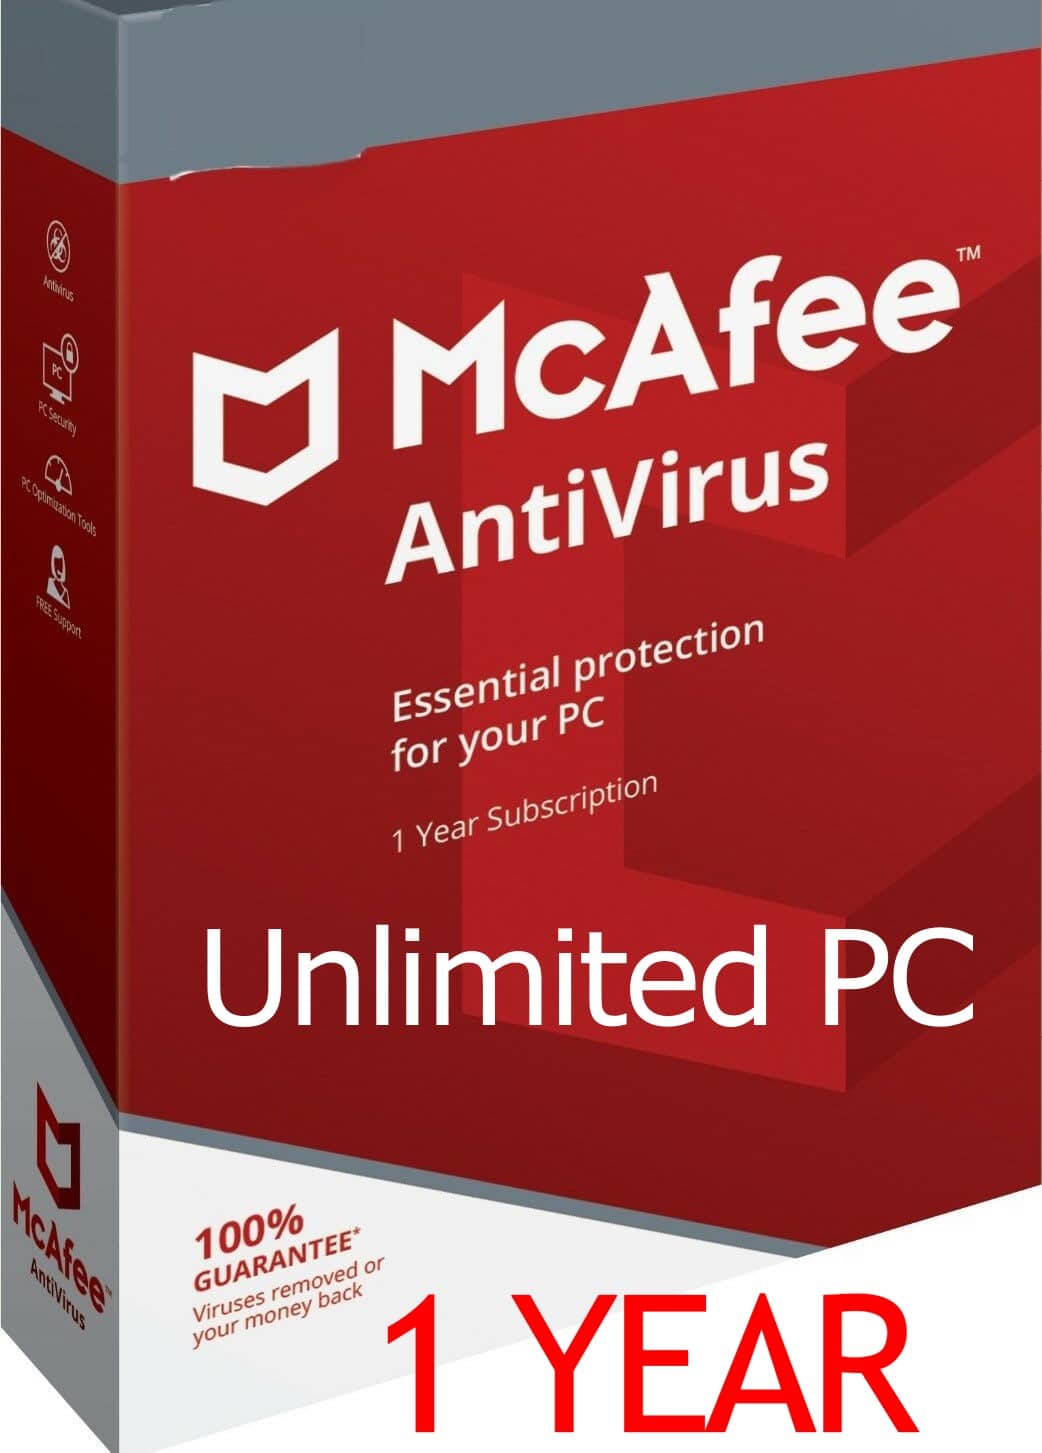 mcafee antivirus for pc free download 2018